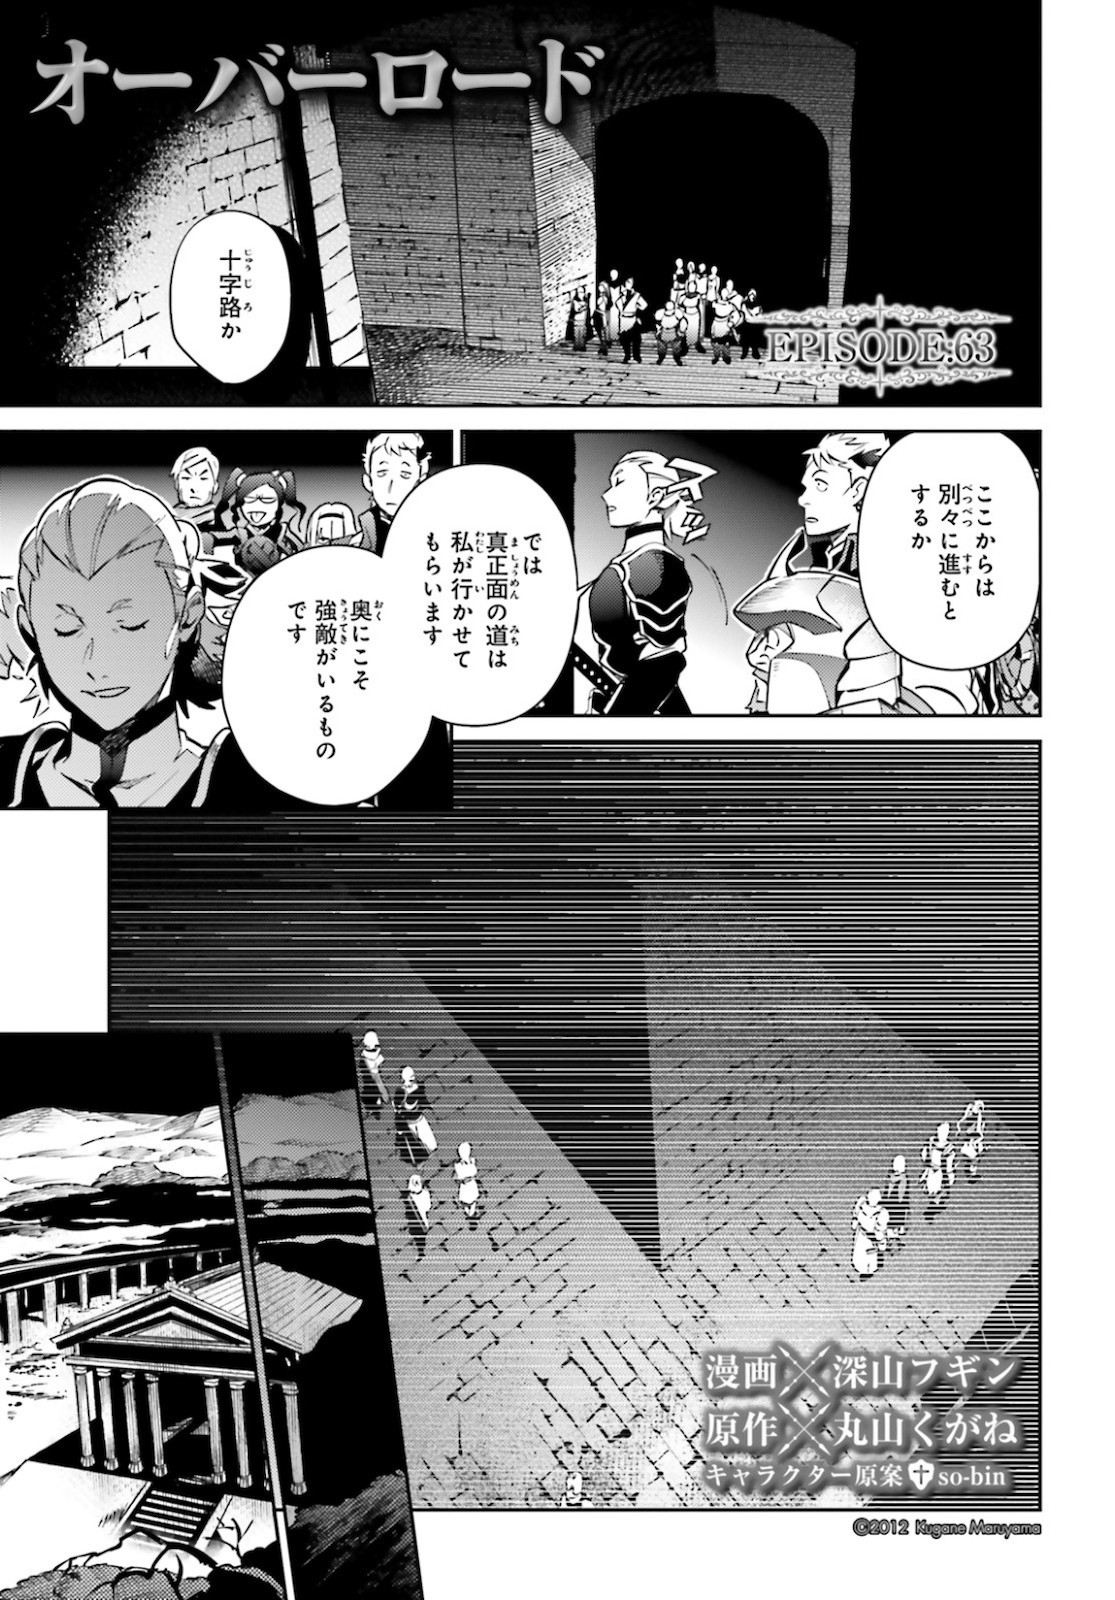 Overlord - Chapter 63 - Page 1